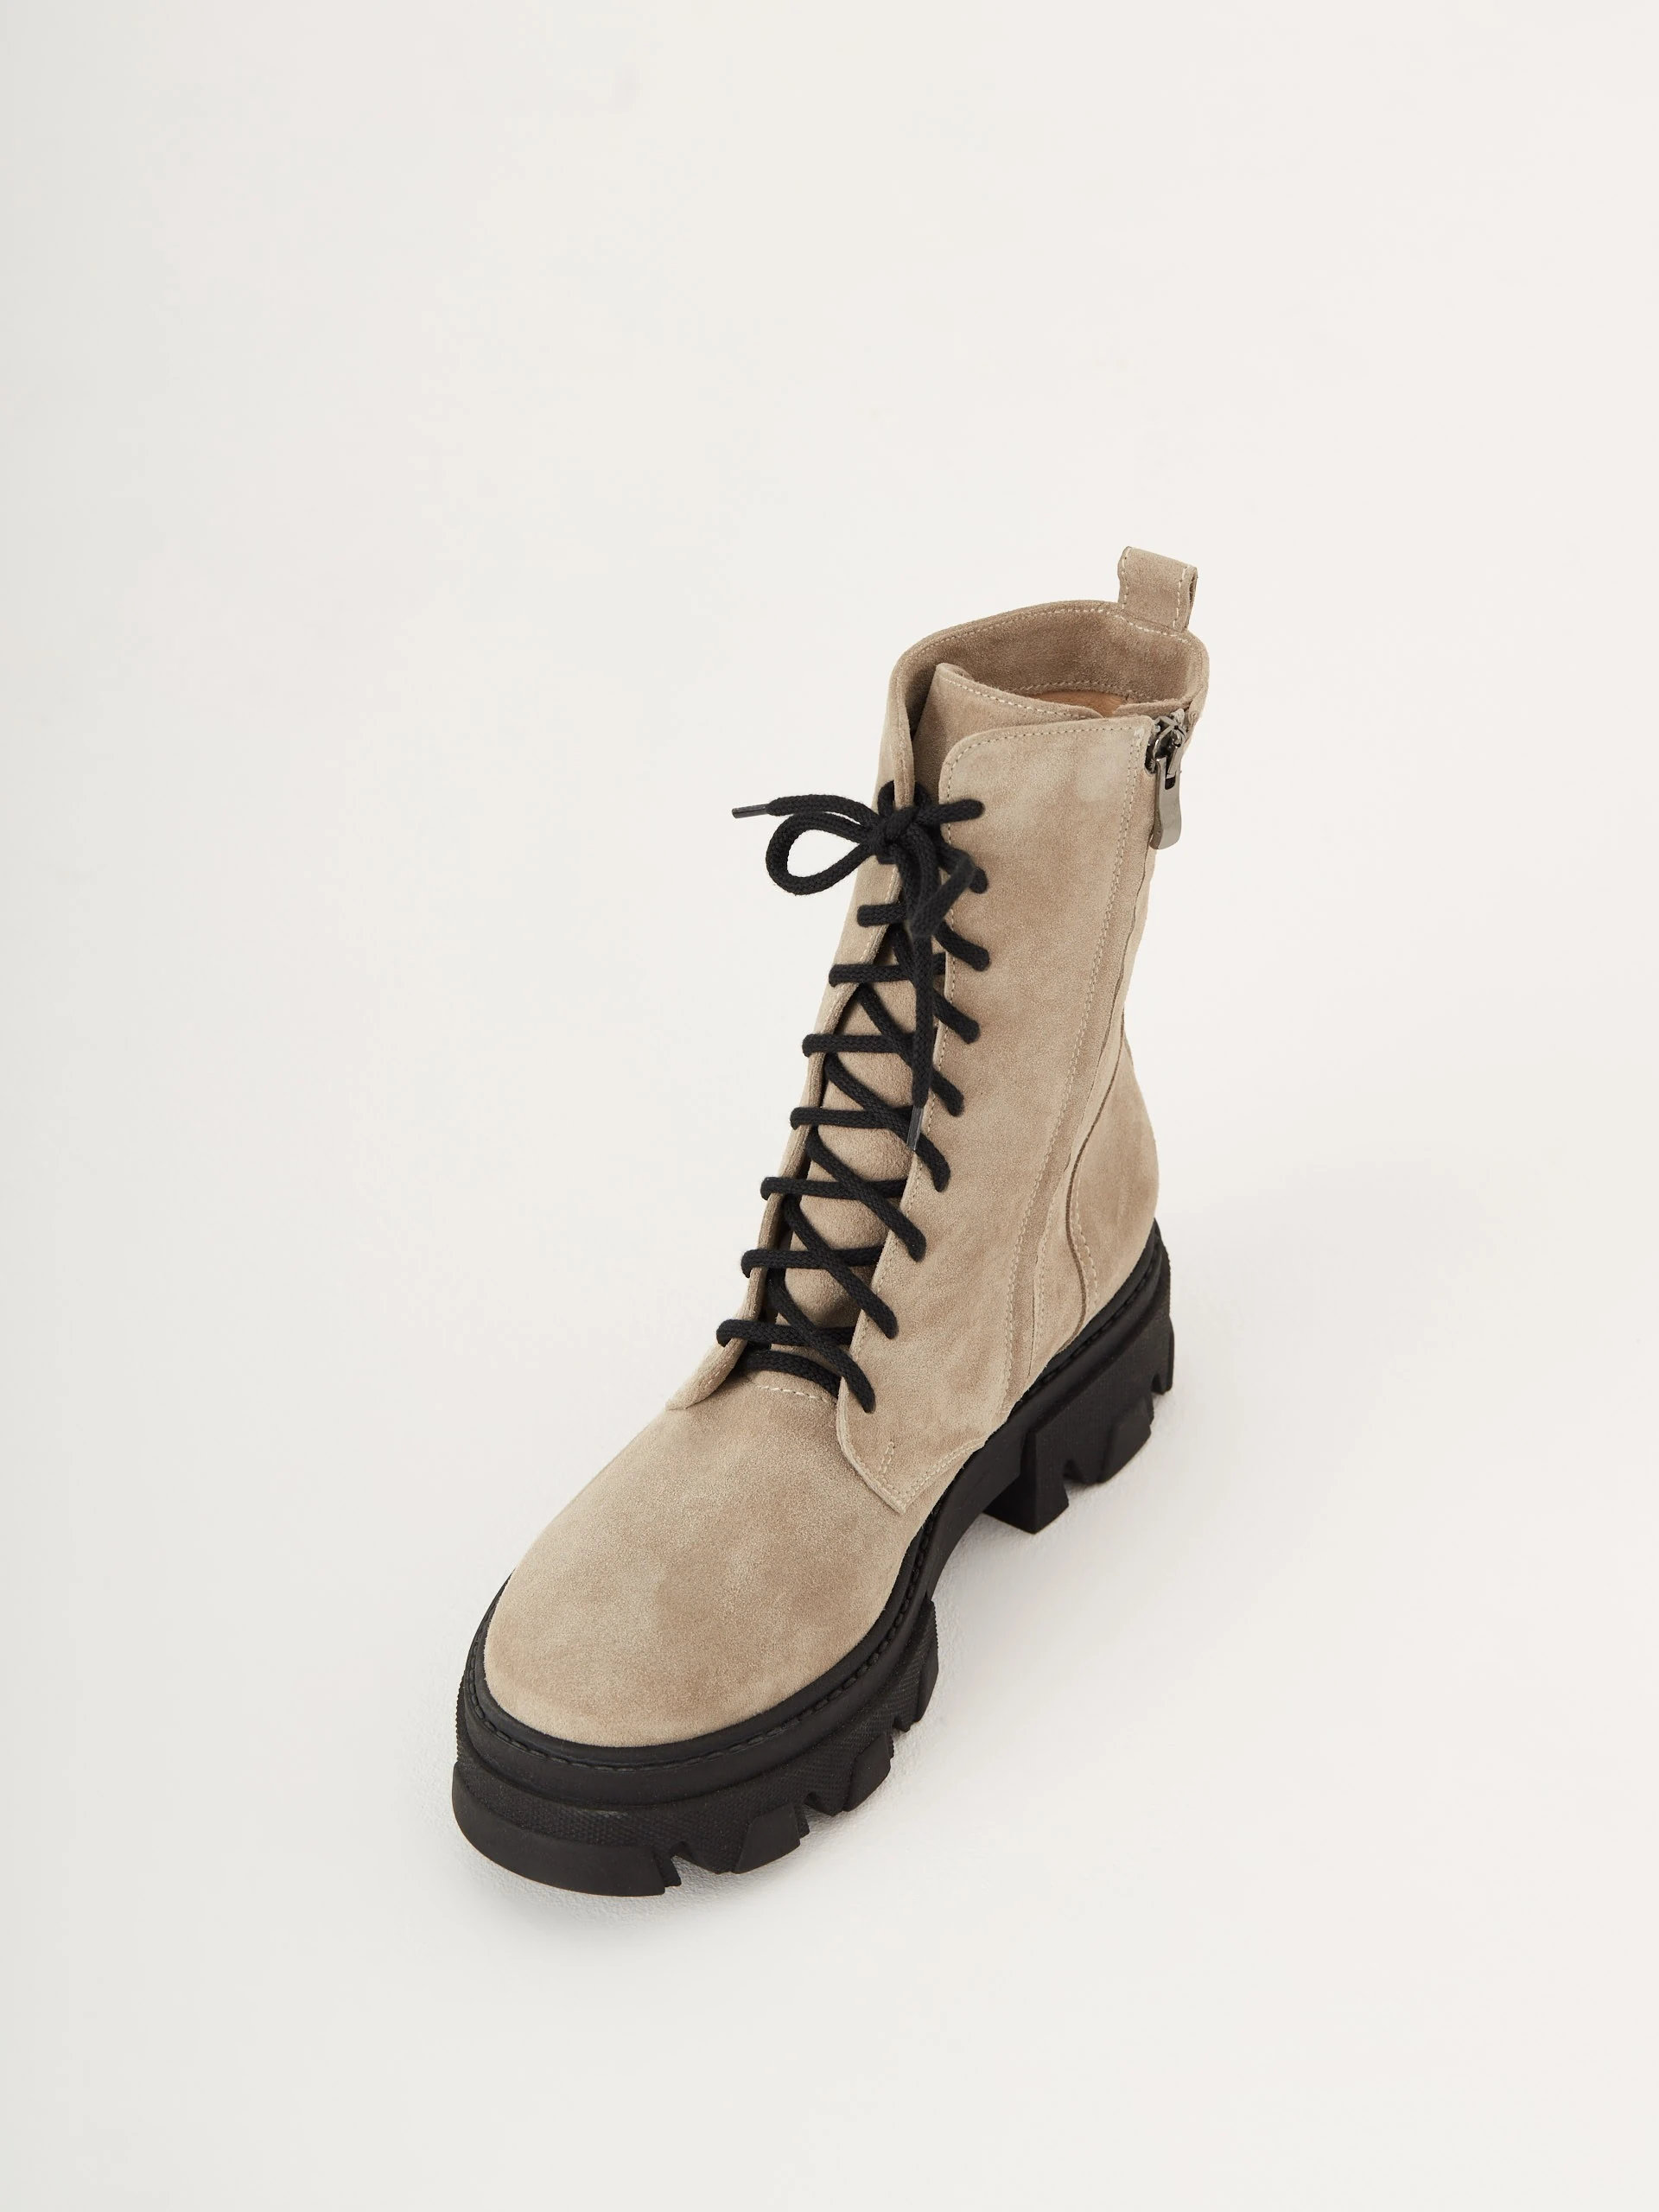 Beige boots from natural leather